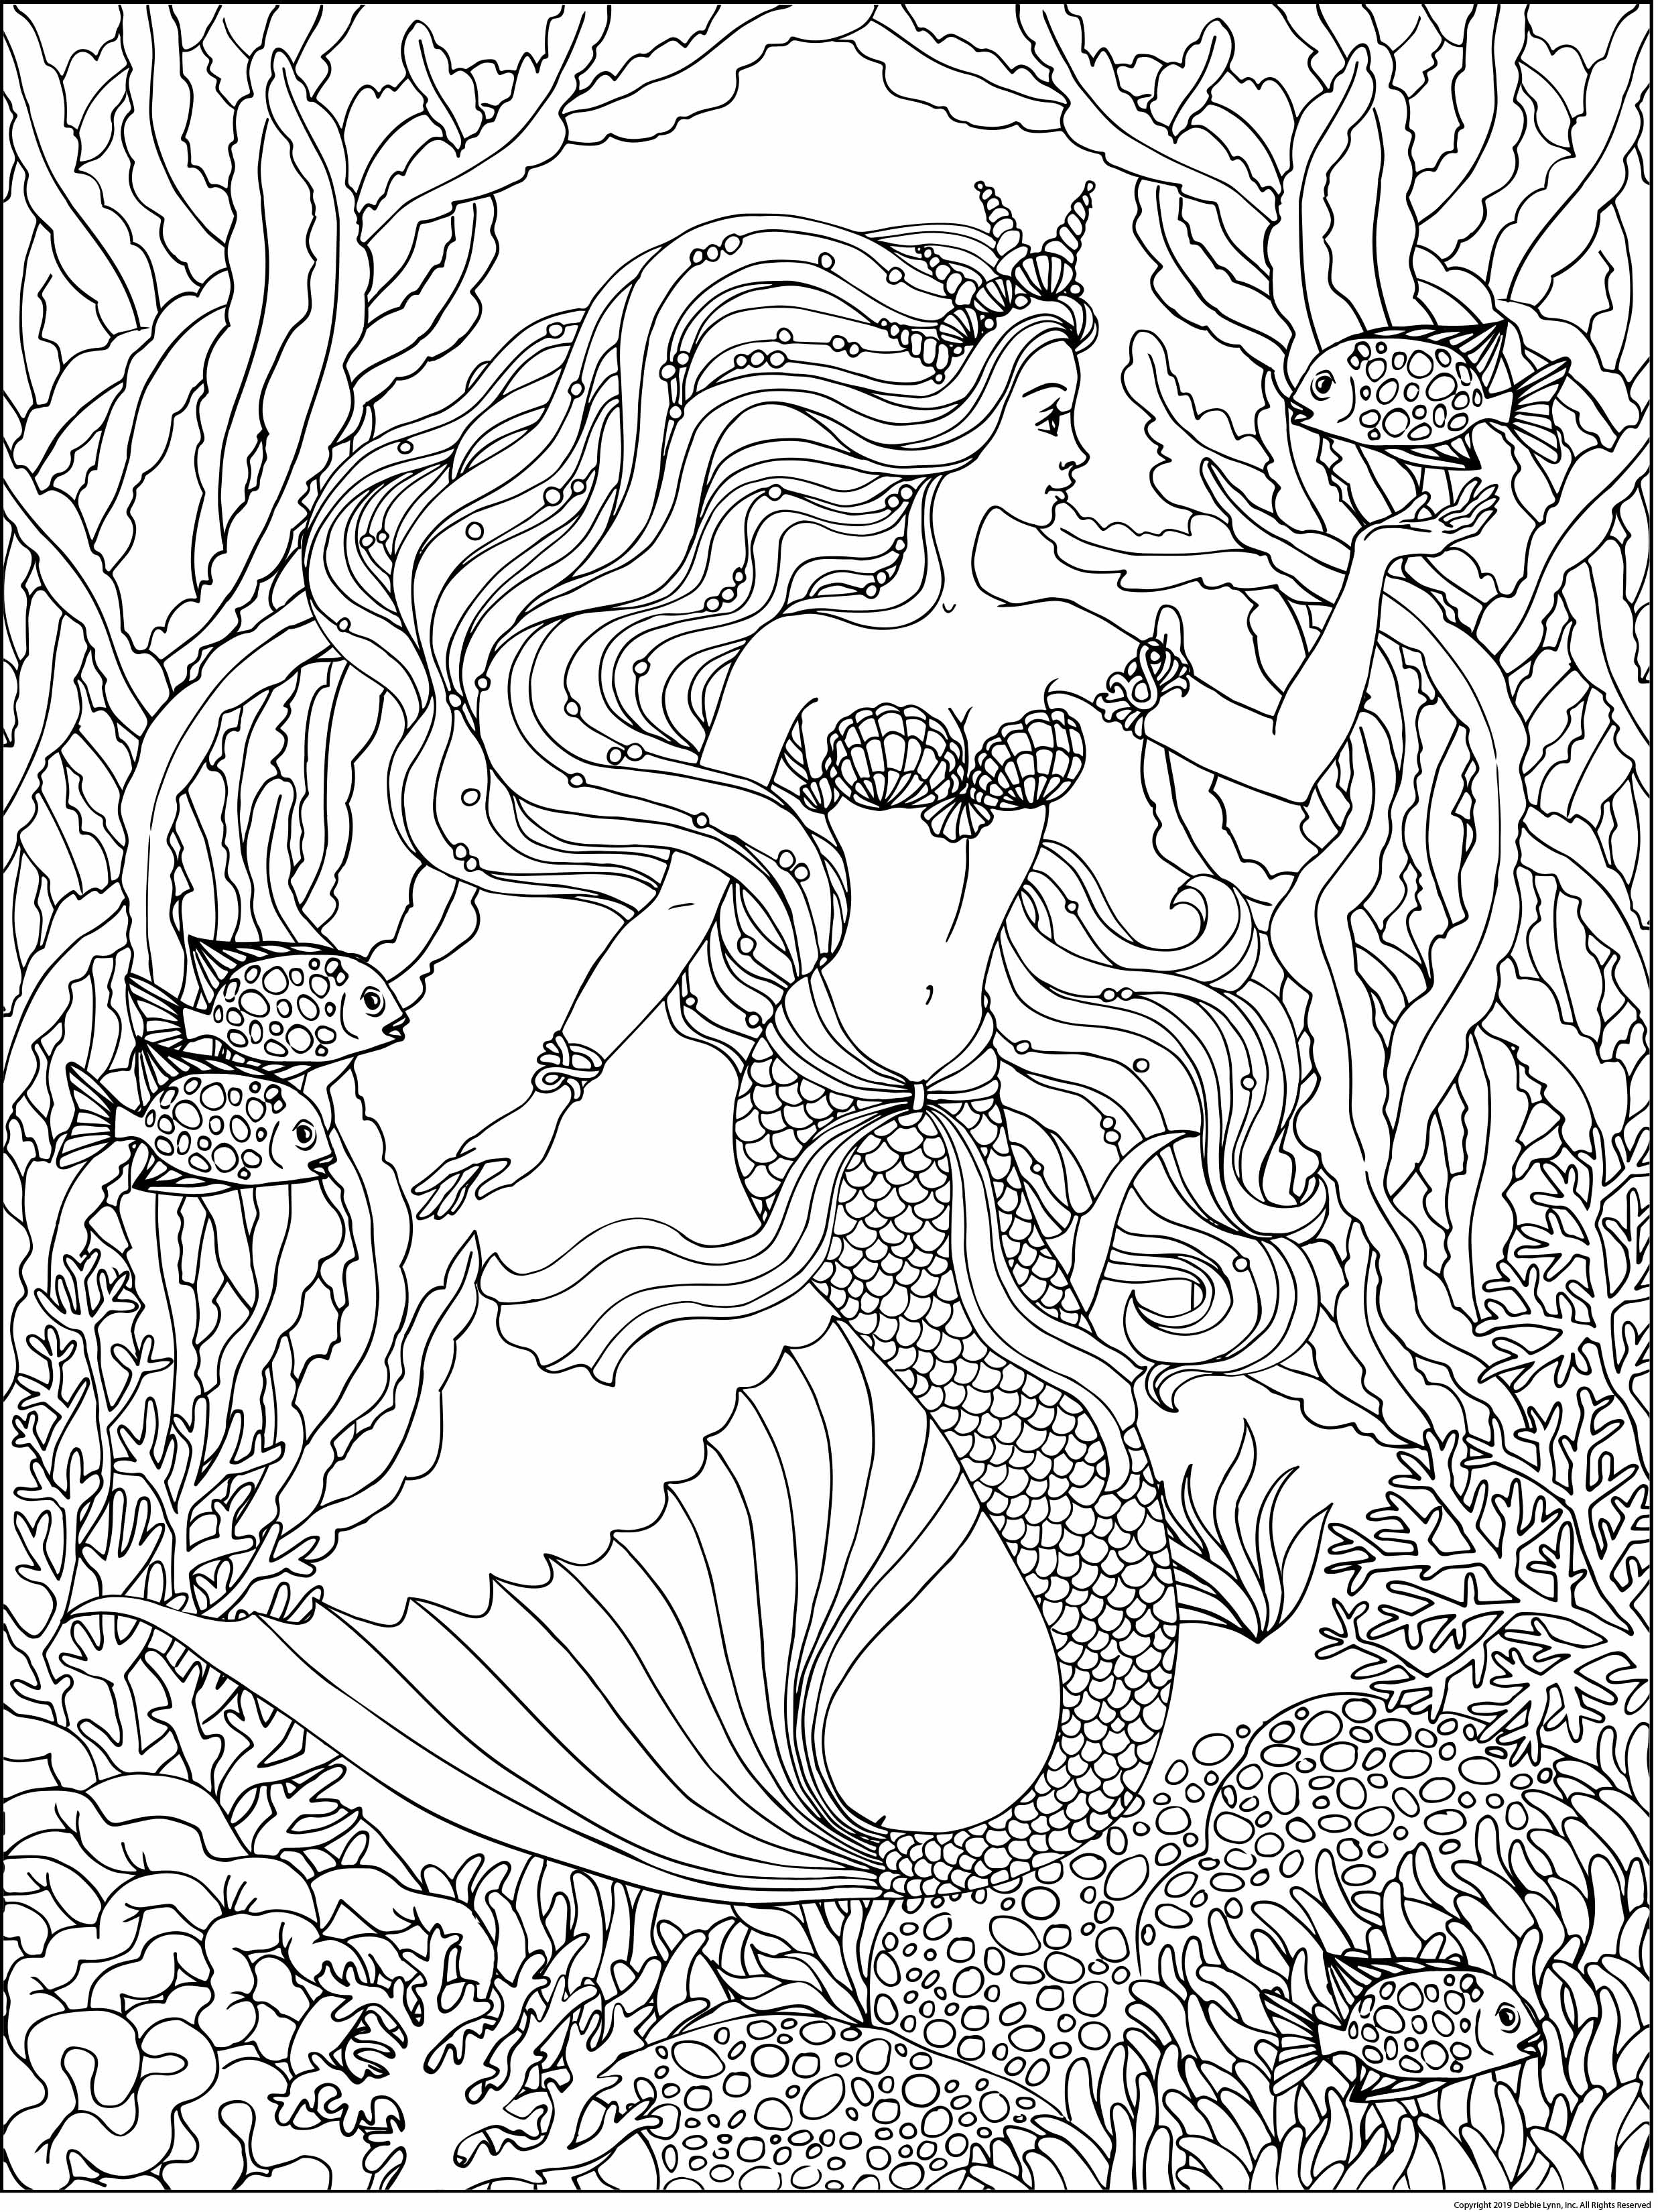 table sized coloring pages